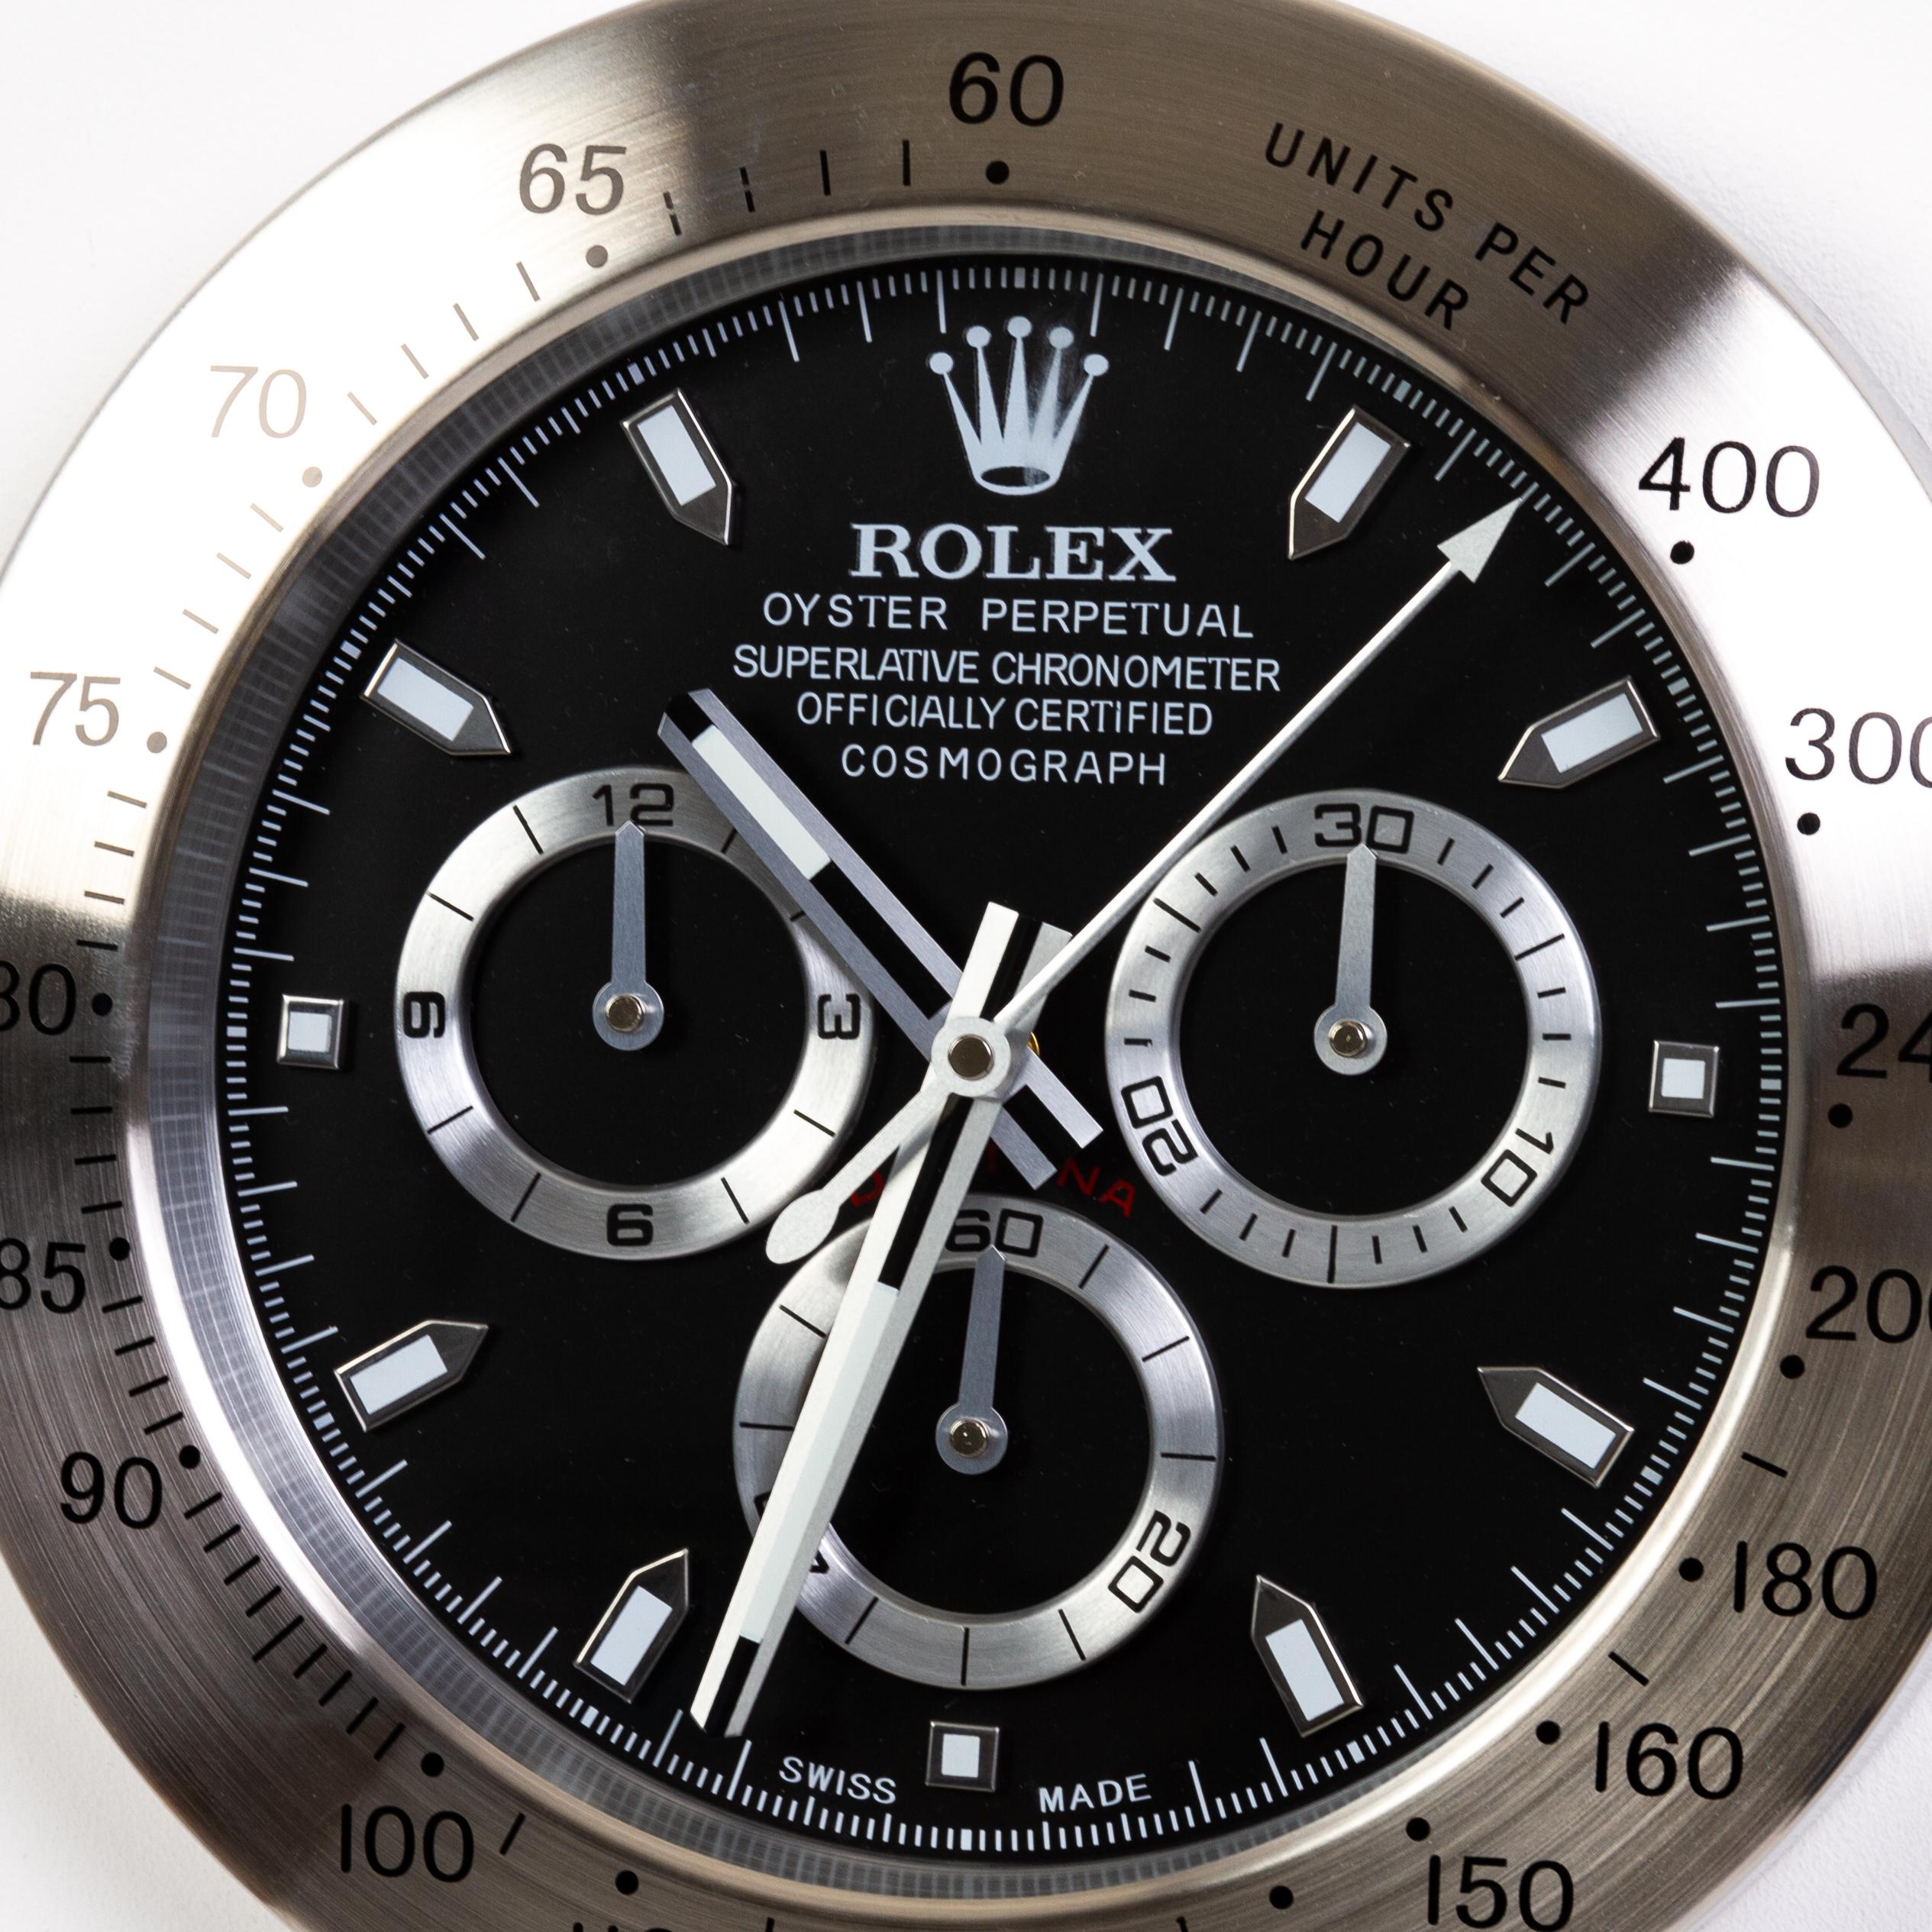 ROLEX Officially Certified Oyster Perpetual Cosmograph Wall Clock 
Good condition, working.
Free international shipping.